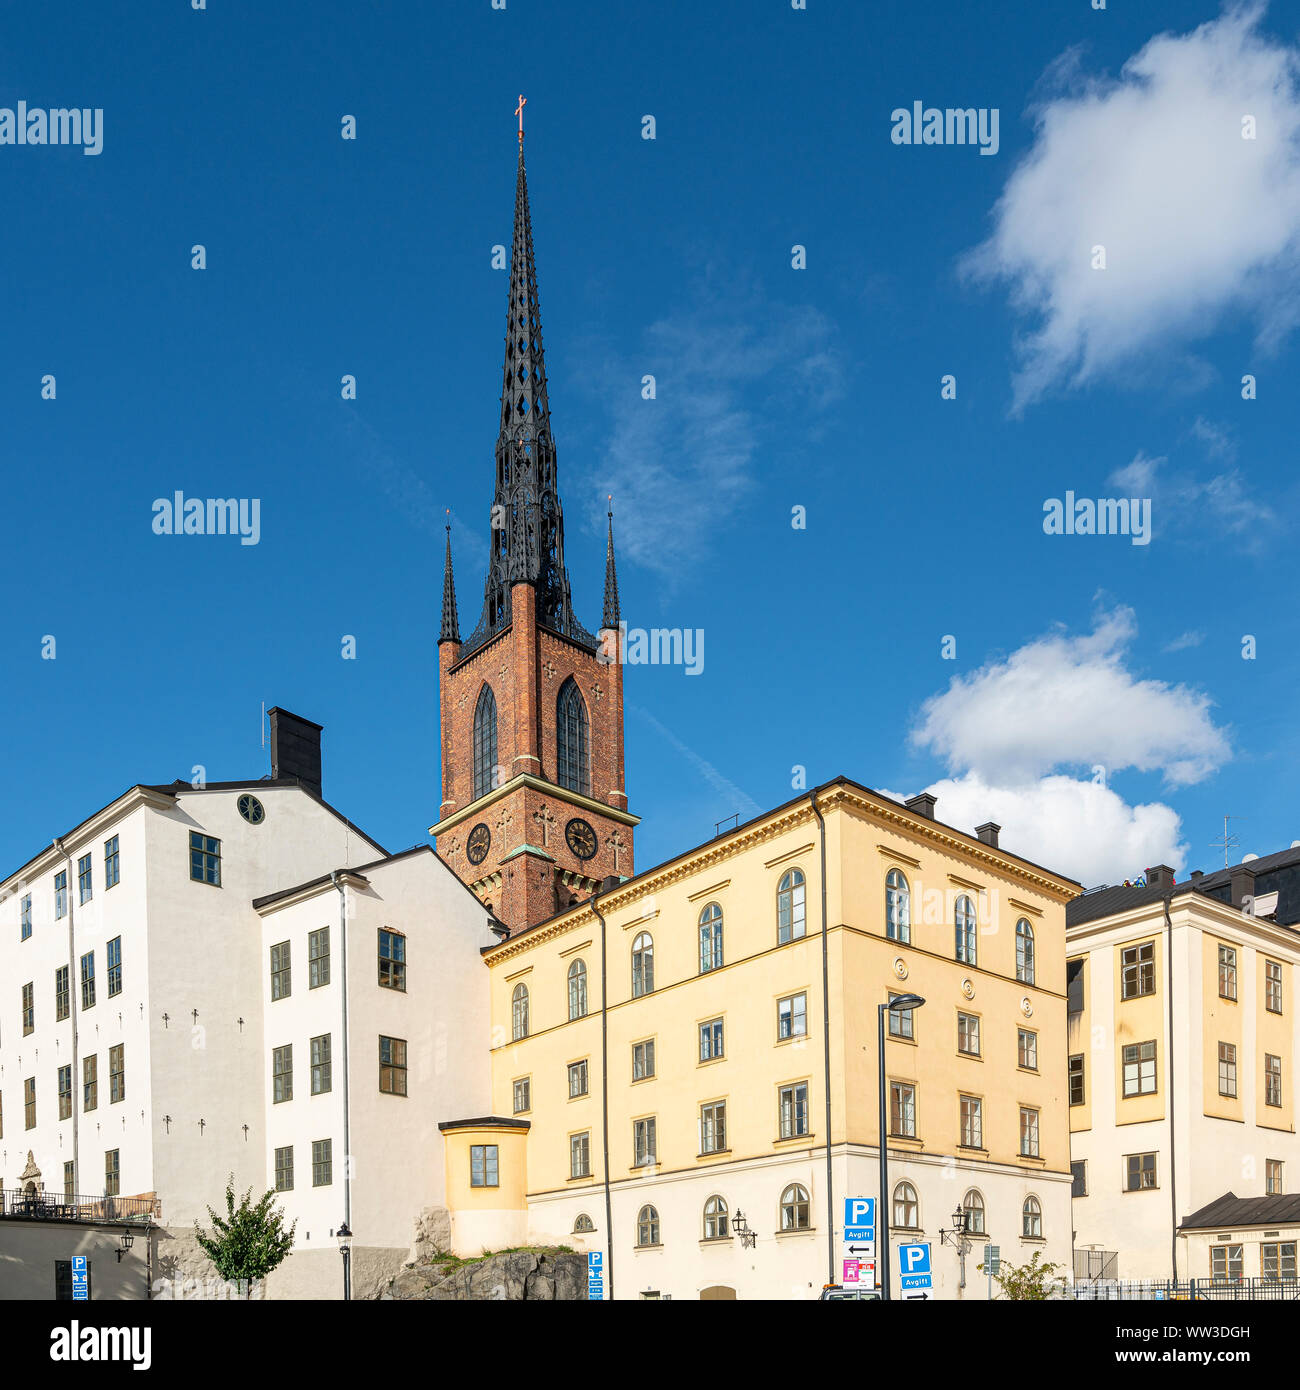 Stockholm, Sweden. September 2019.  view of the bell tower of the  Riddarholmen church among the old houses of Gamla Stan island Stock Photo